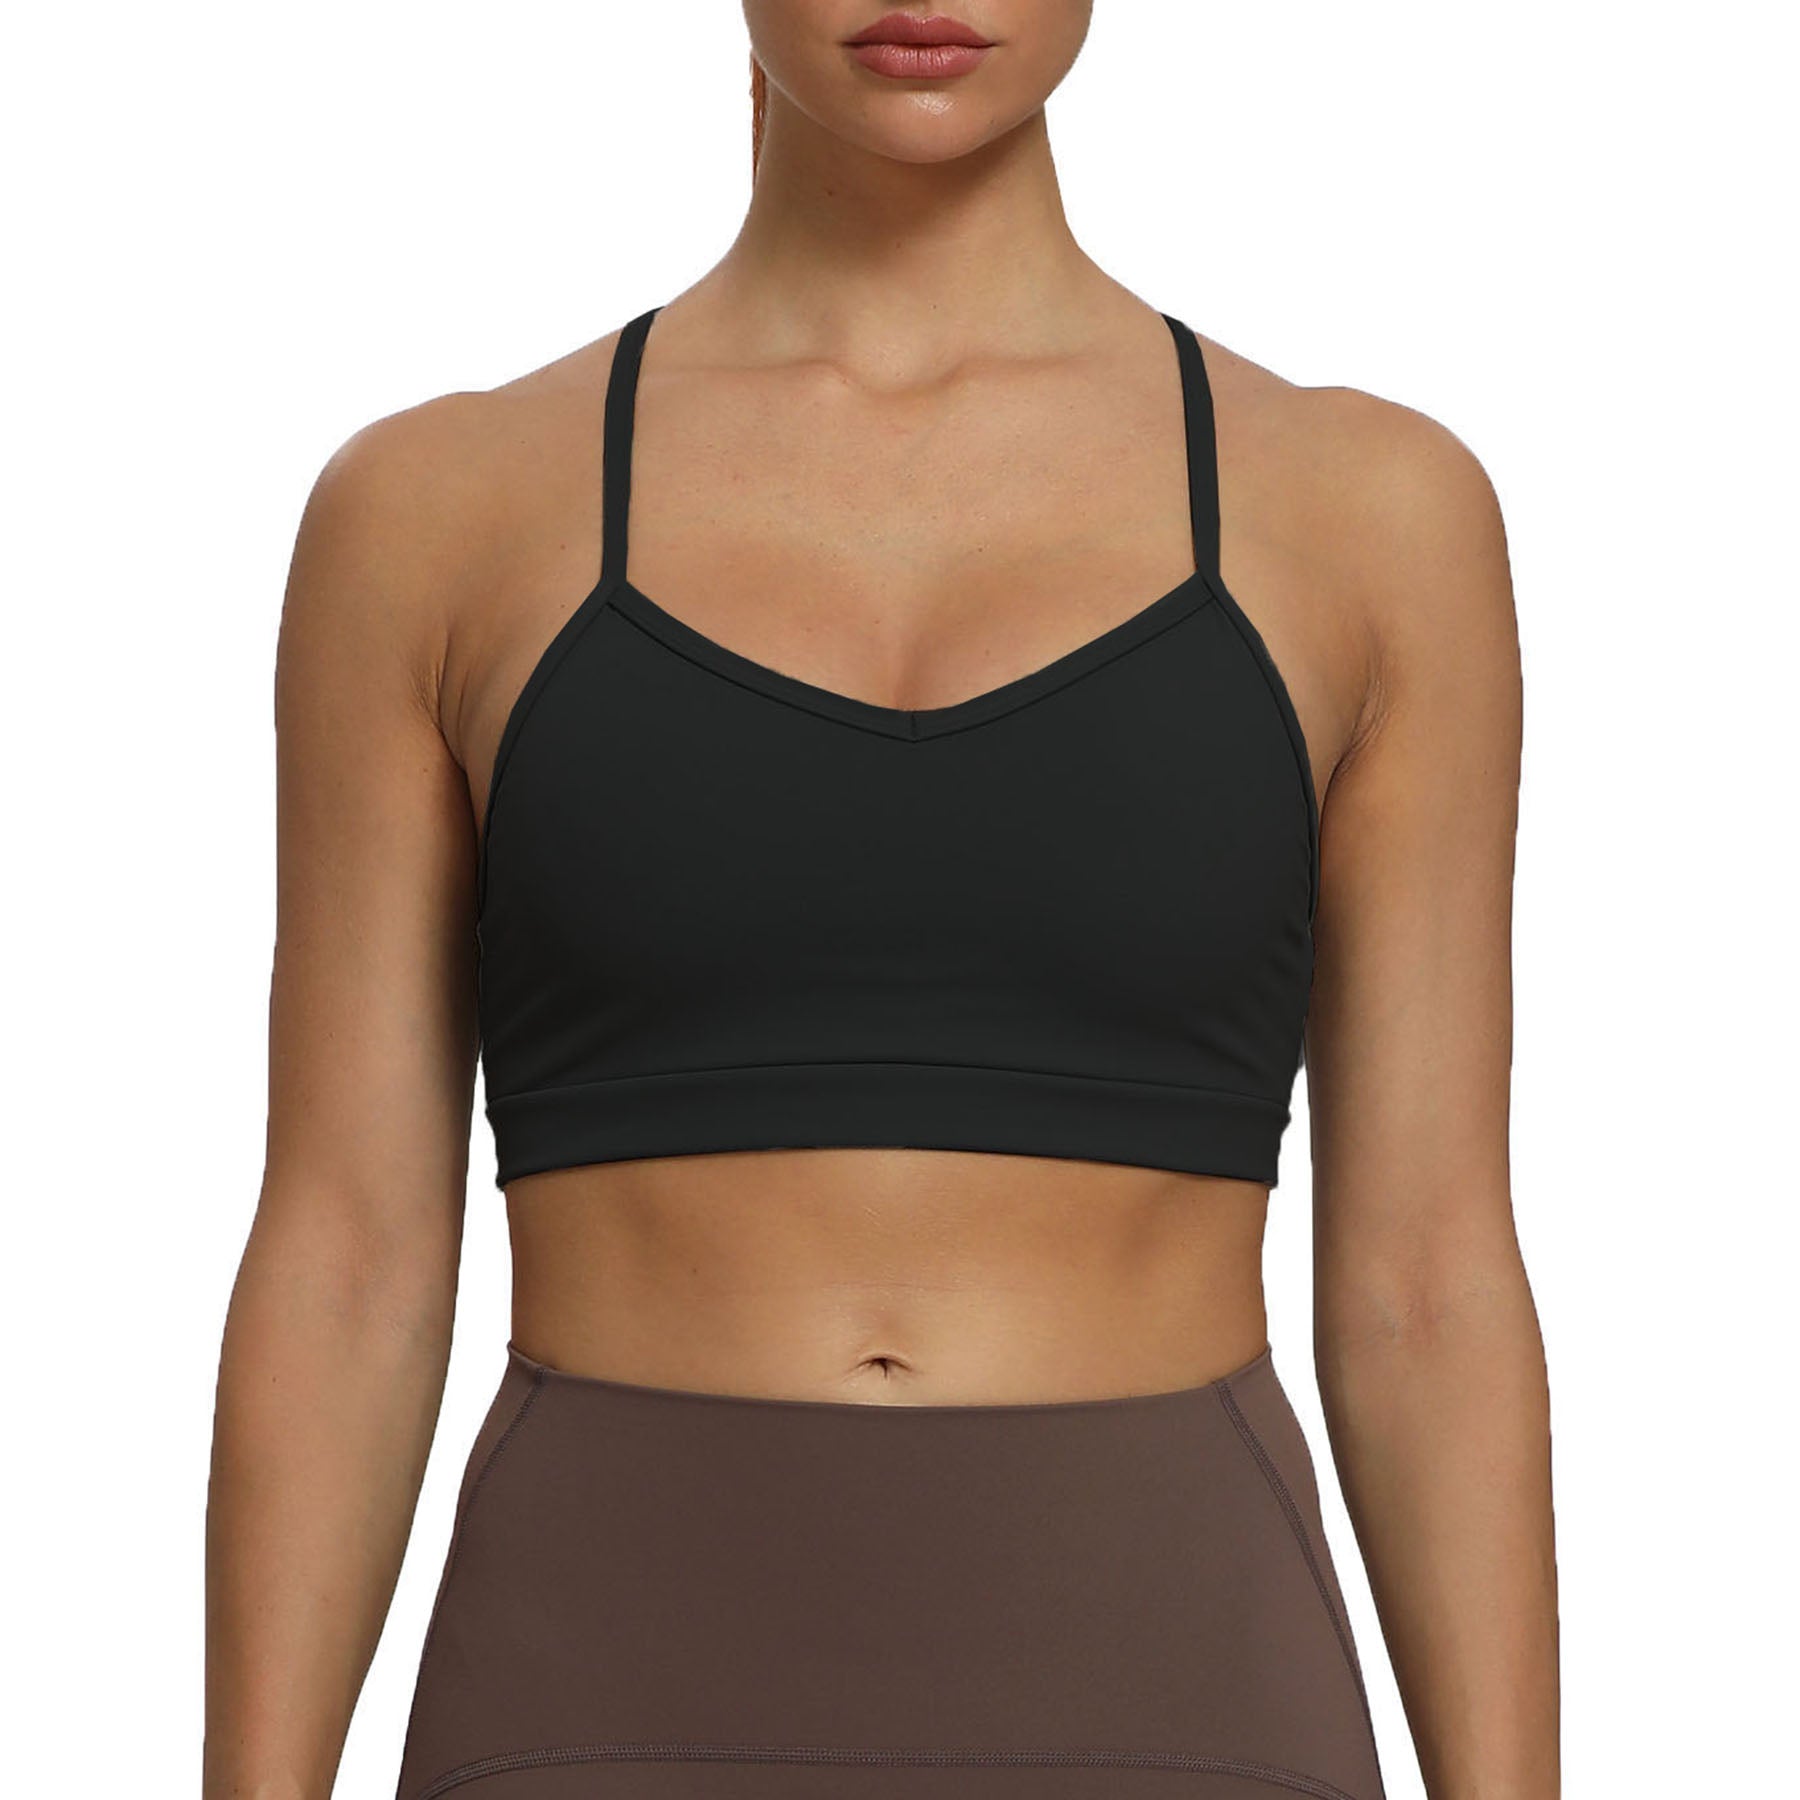 Aoxjox Sports Bra Red Size XS - $10 (68% Off Retail) - From Samantha